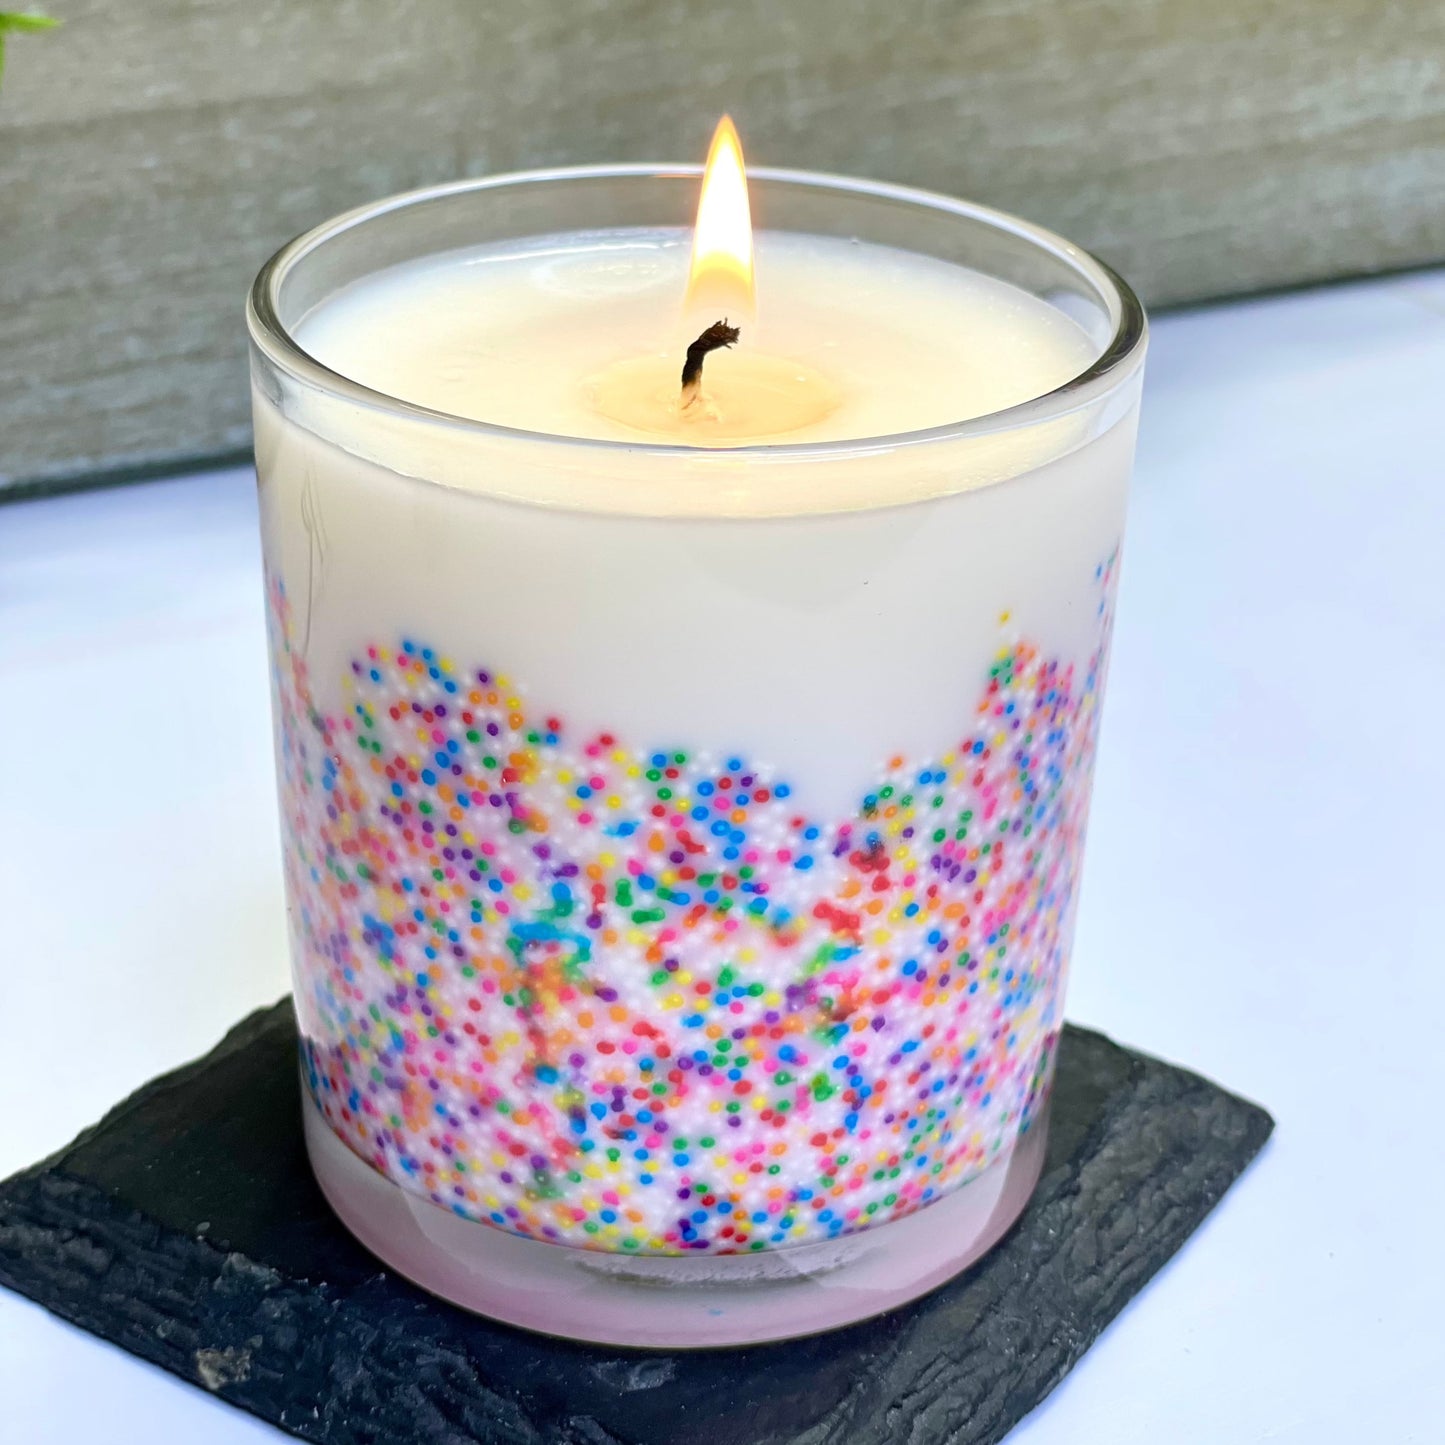 This irresistible birthday cake-scented candle stands tall, adorned with colorful sprinkles, emitting a warm glow. Its handcrafted charm fills the air with nostalgia and joy. Perfectly capturing the spirit of a festive occasion in a delightful aroma. Best birthday candle in Parker Colorado